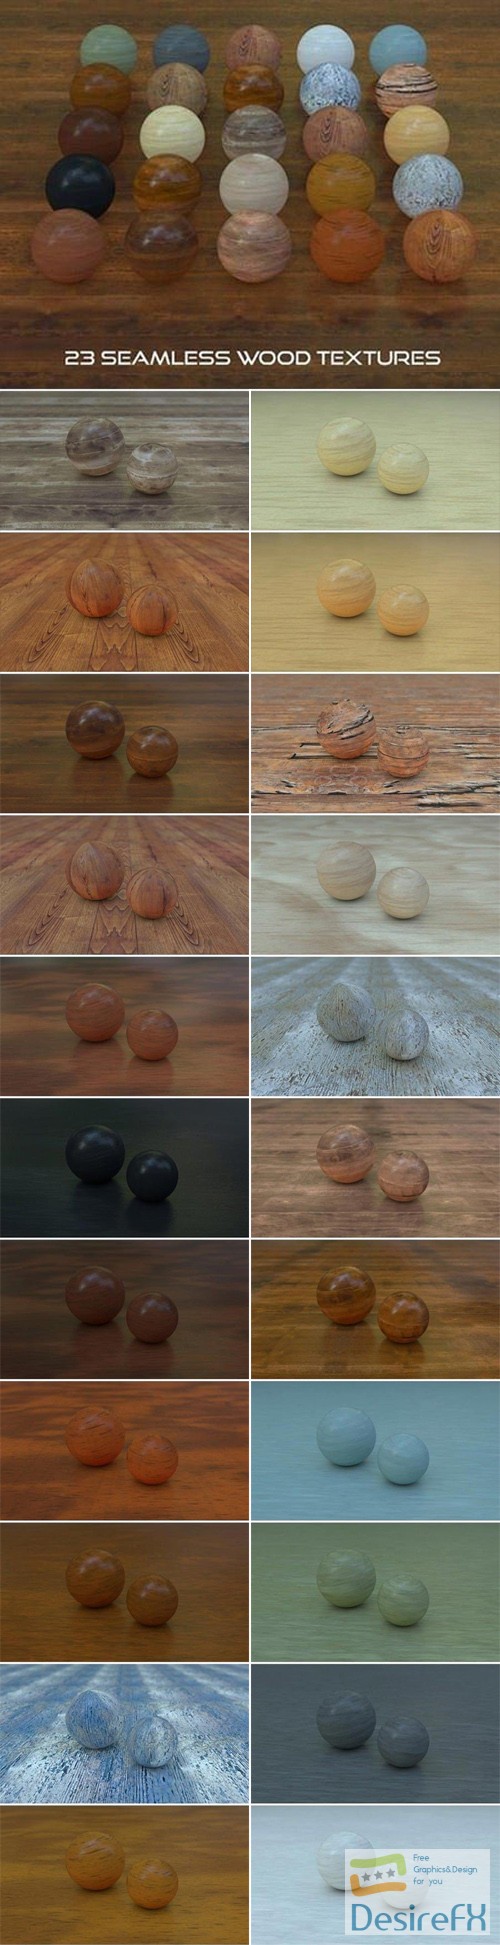 23 Seamless Wood Textures for Cinema 4D